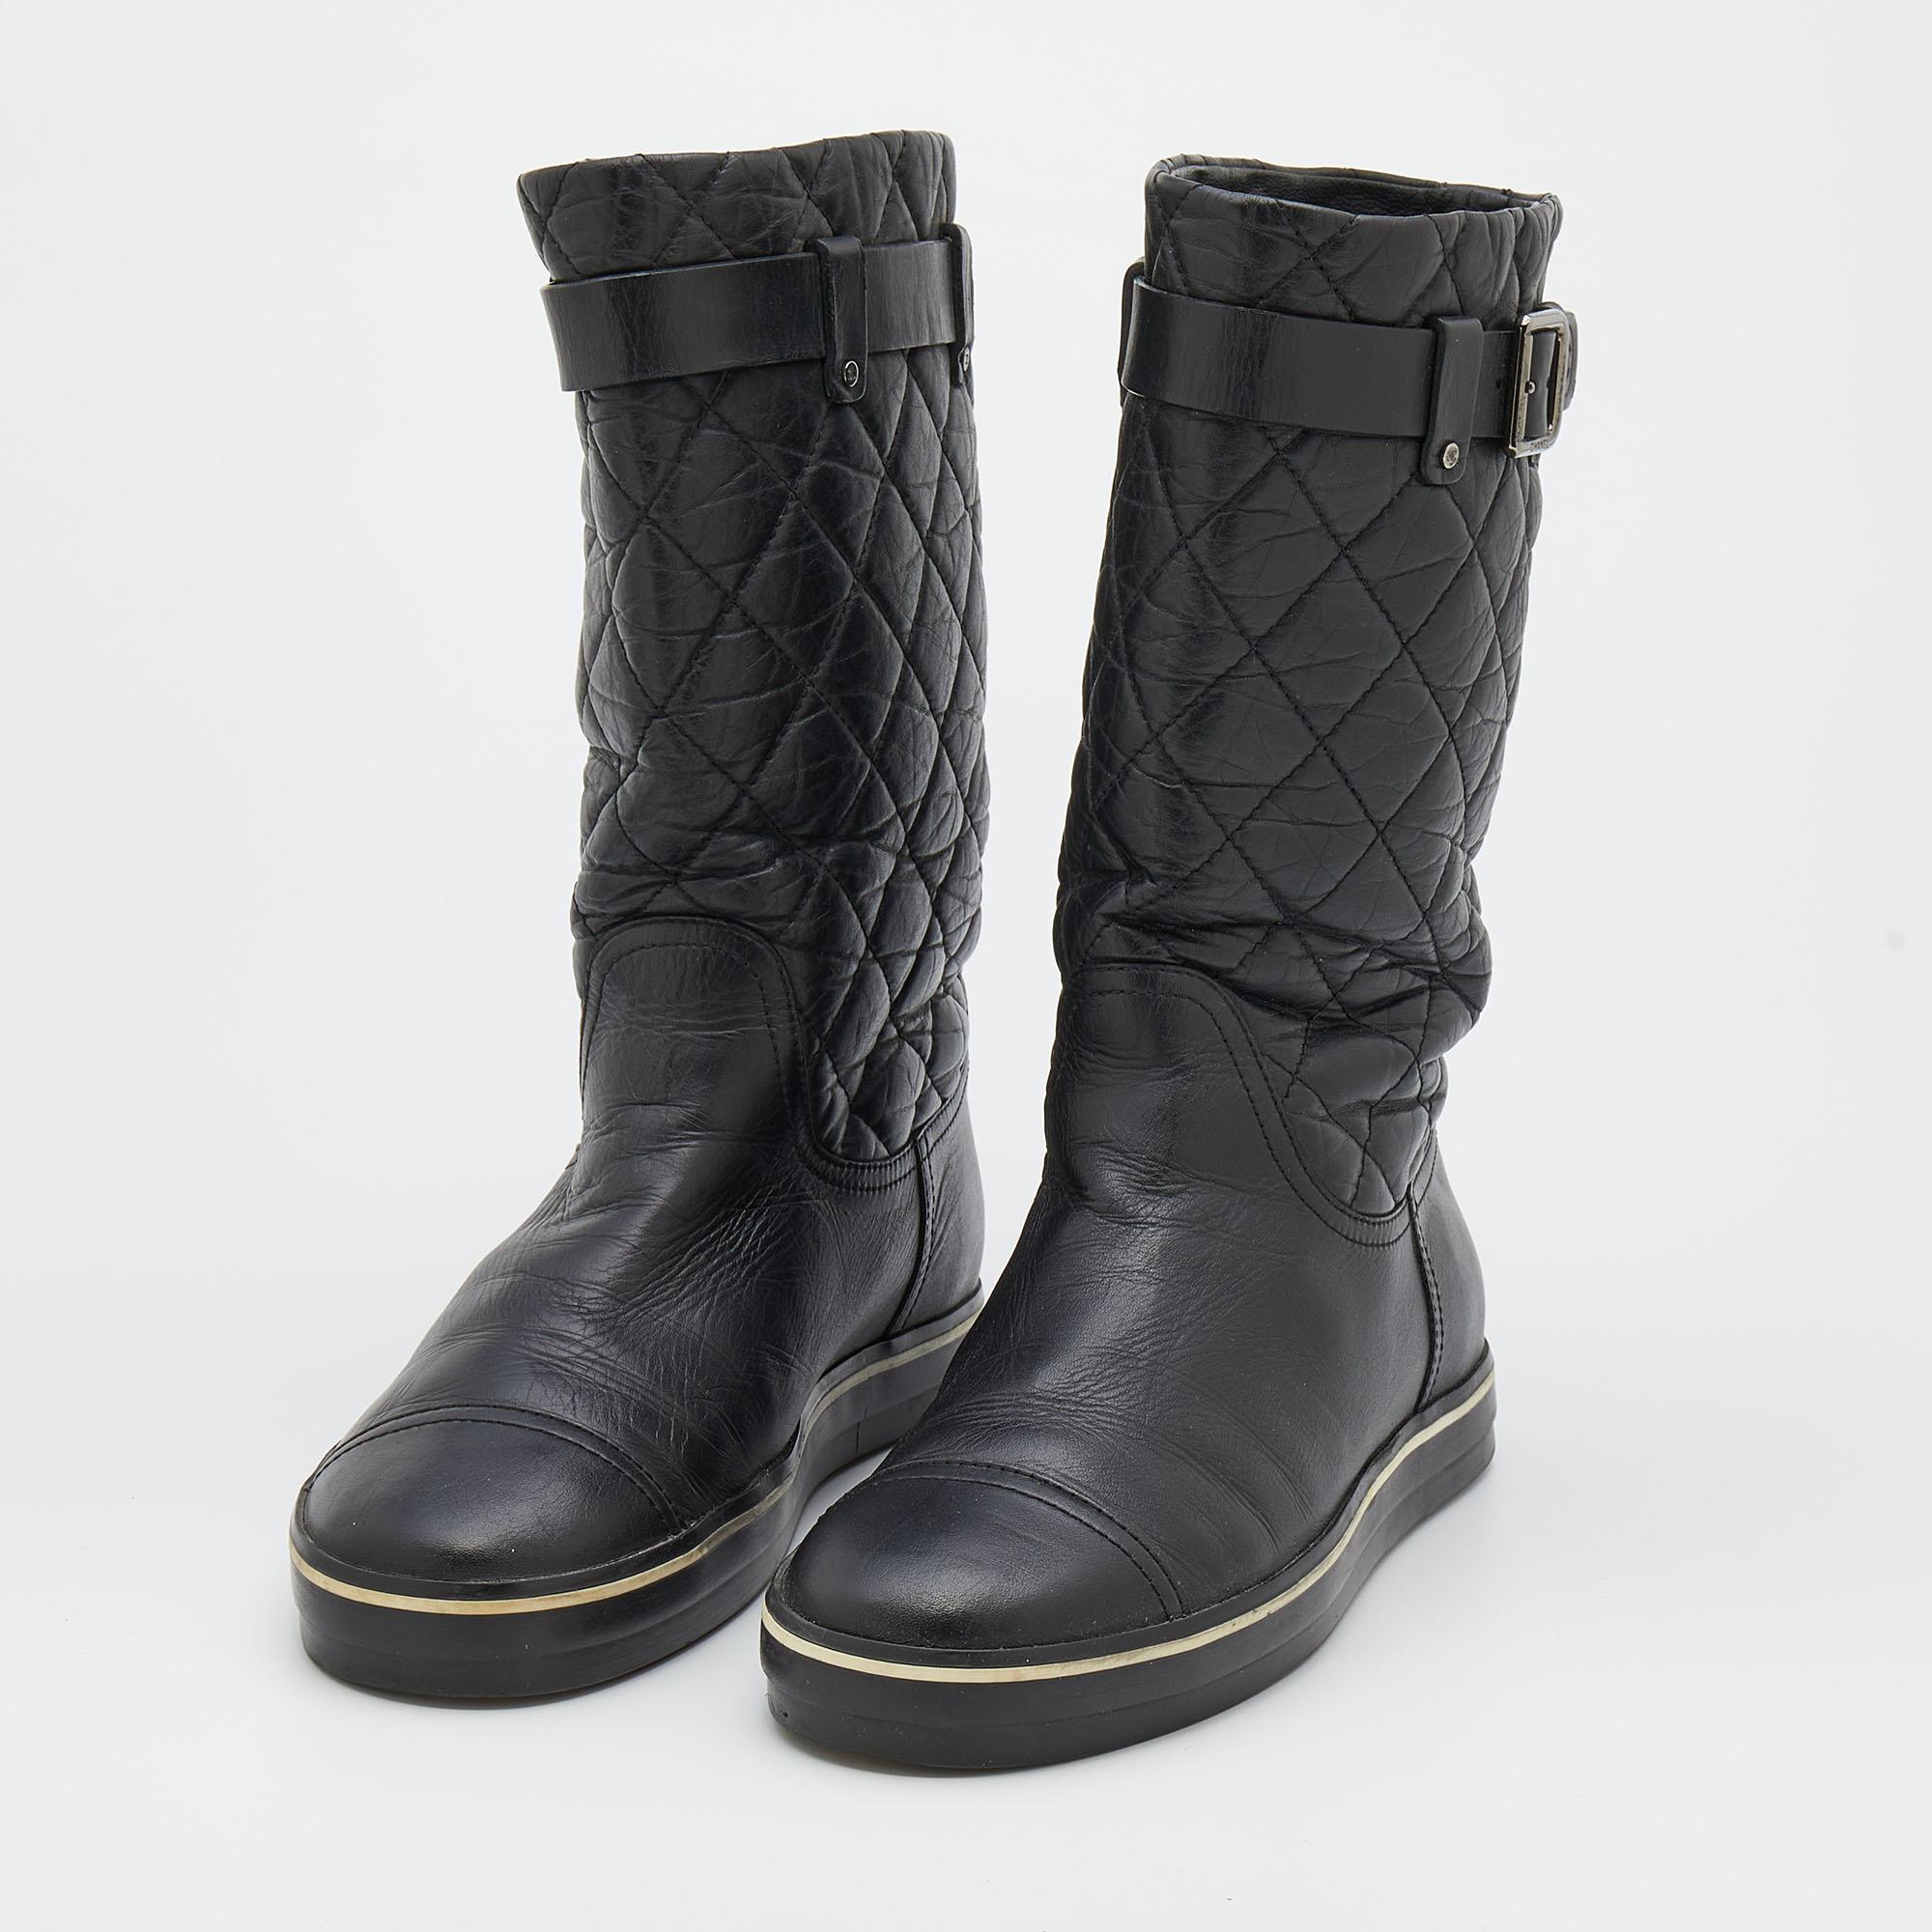 Chanel Black Quilted Leather Mid Calf Length Boots Size 37.5 2